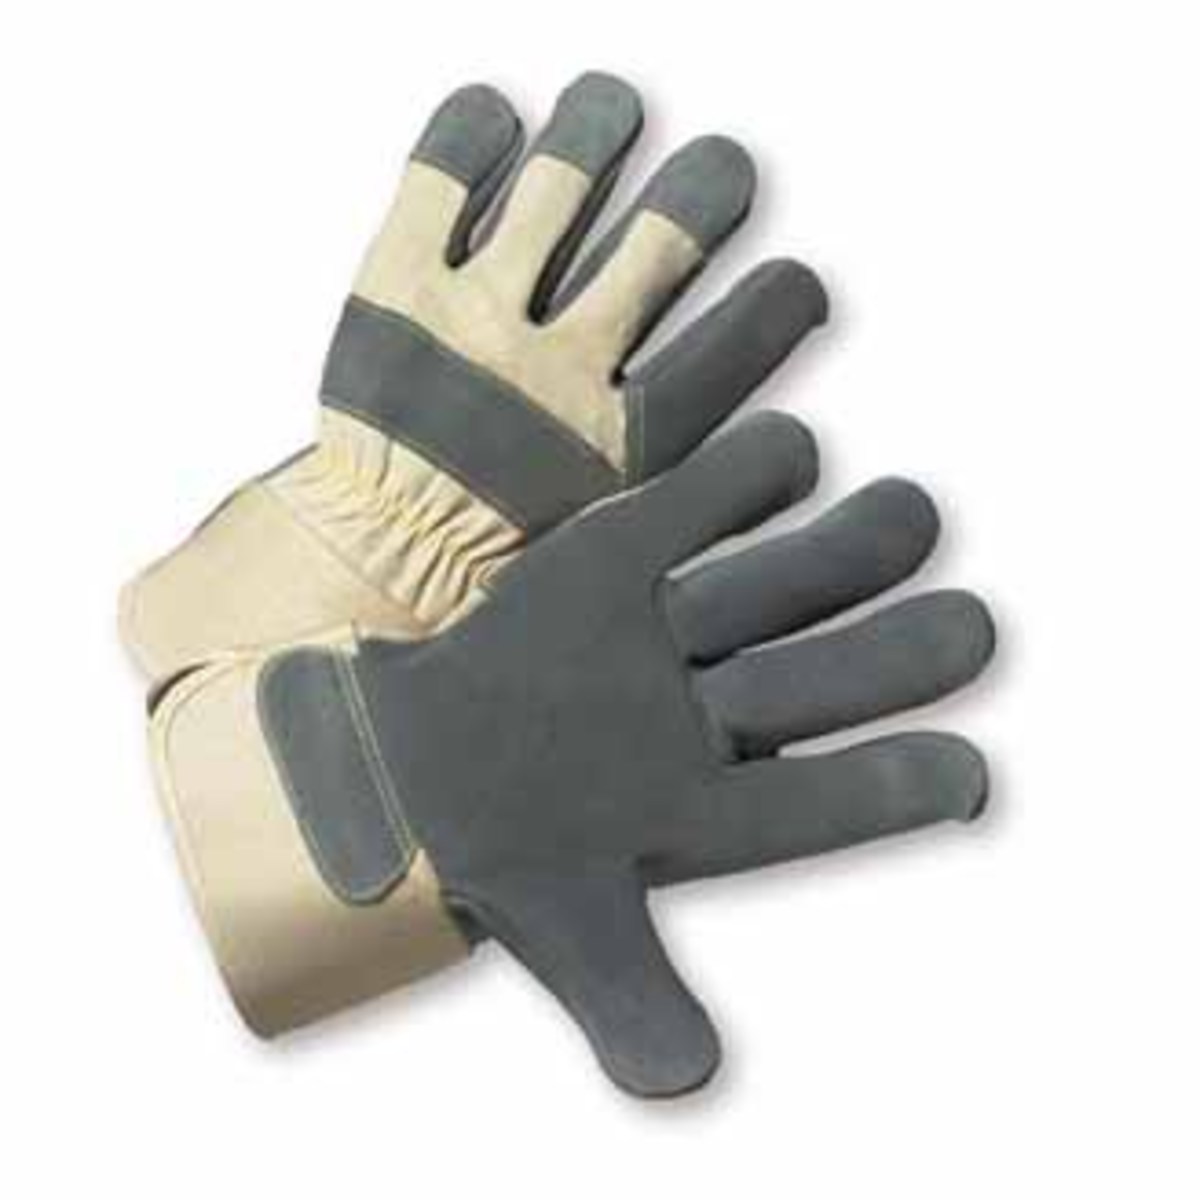 PIP® X-Large Premium Grain Cowhide Palm Gloves With Canvas Back And Rubberized Safety Cuff